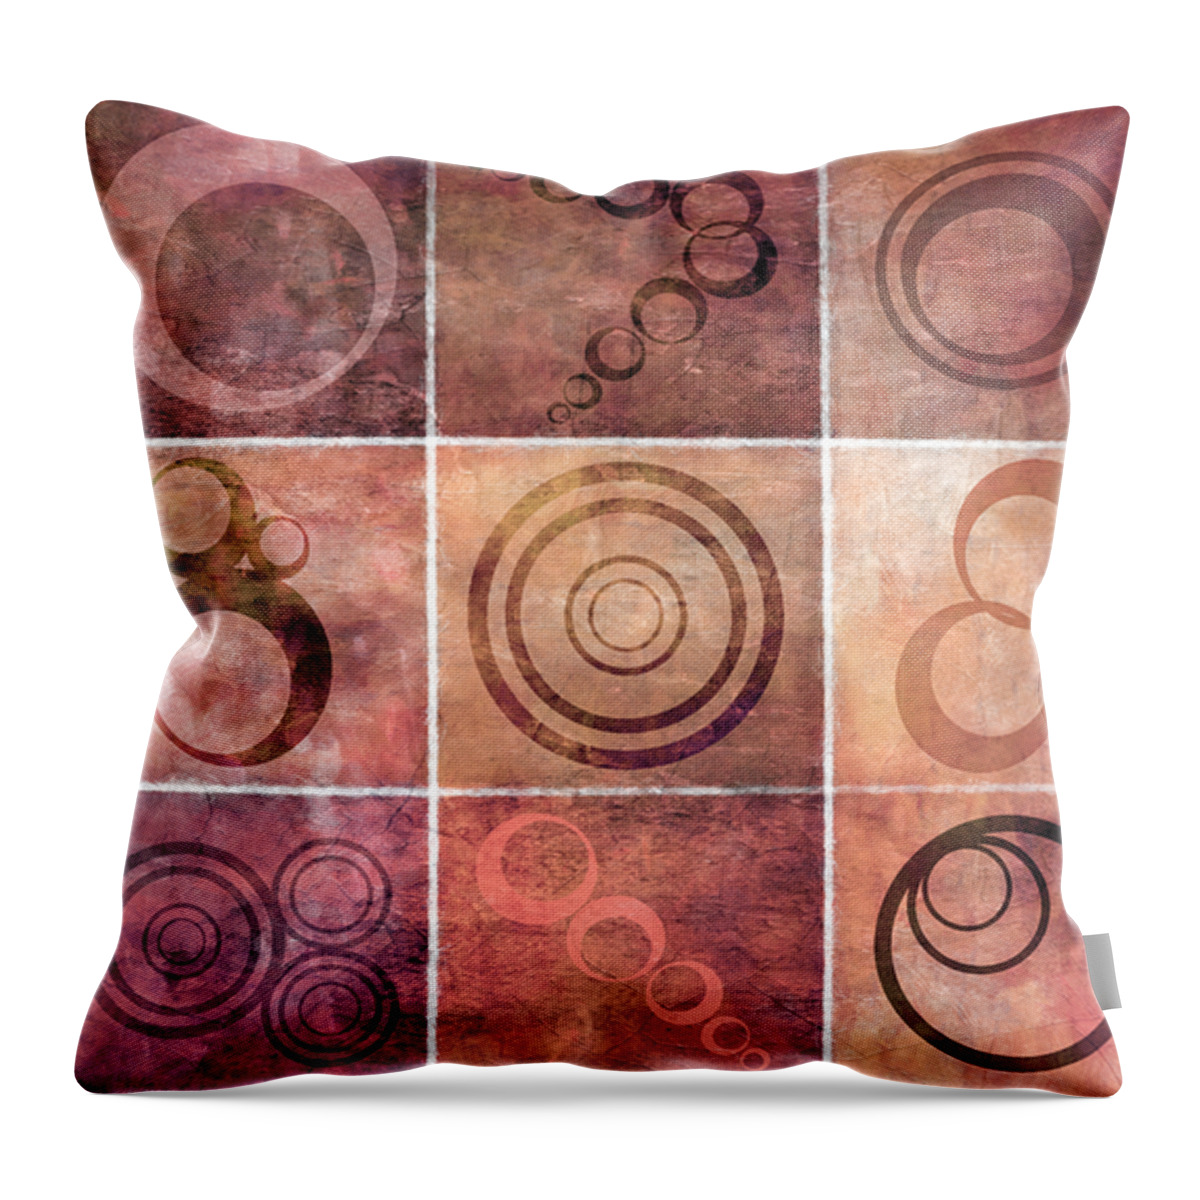 Abstract Throw Pillow featuring the mixed media Orb Ensemble 2 by Angelina Tamez